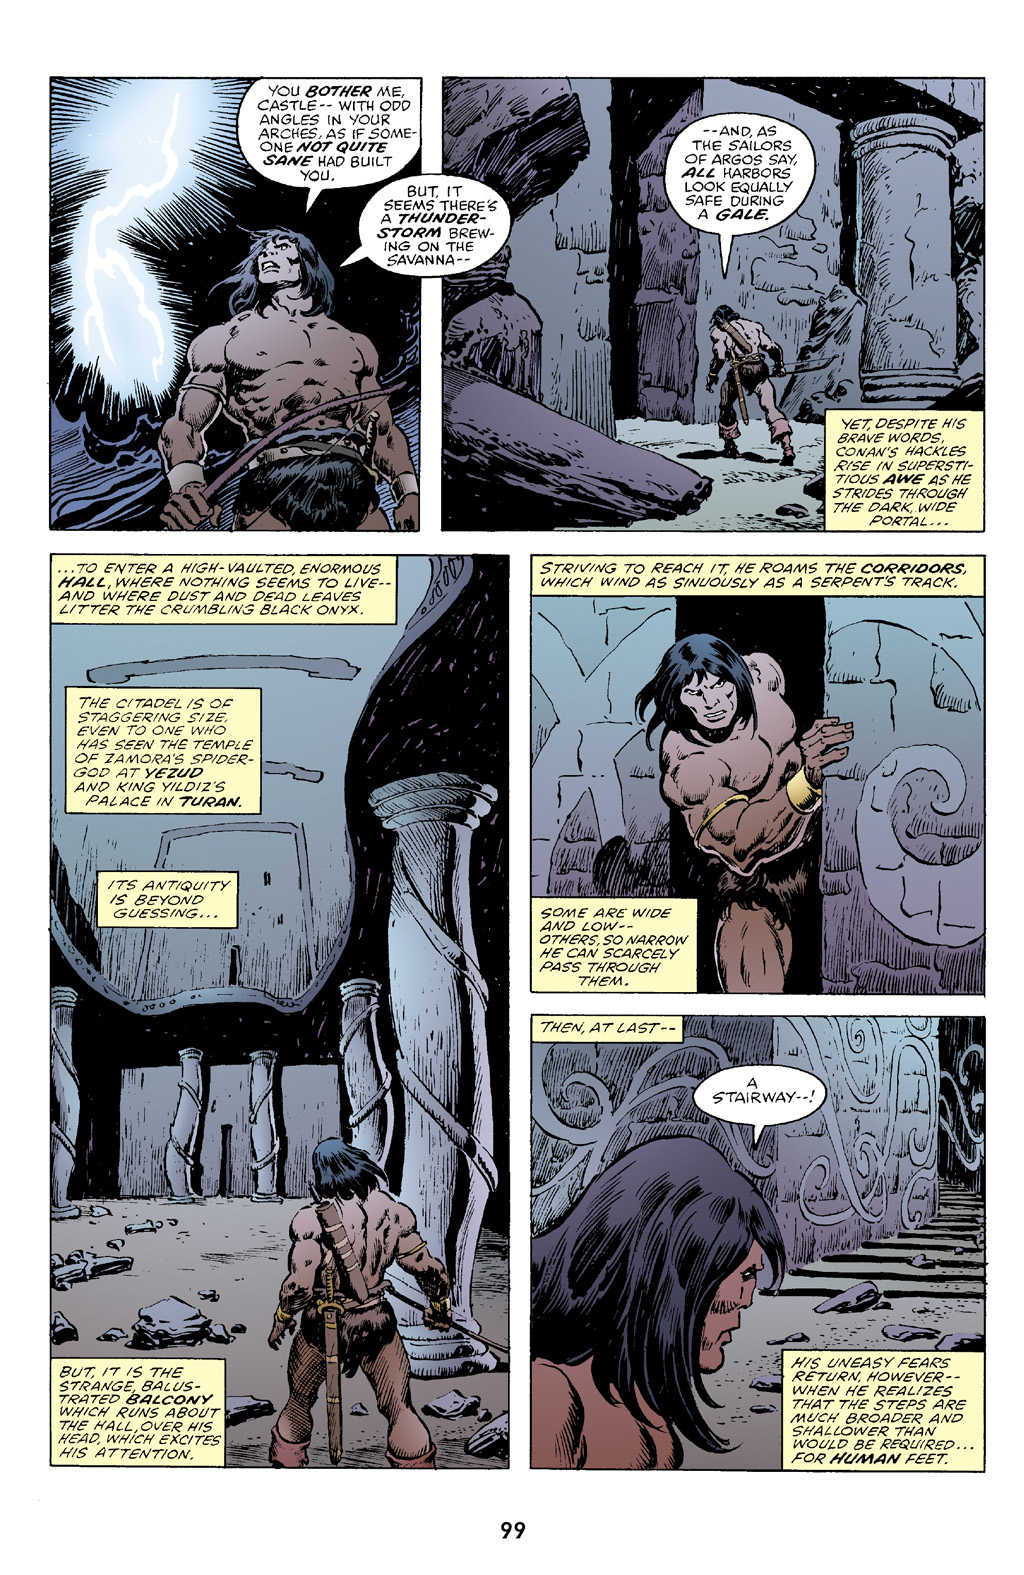 tidligere Skibform pint The Chronicles Of Conan Tpb 13 Part 2 | Read The Chronicles Of Conan Tpb 13  Part 2 comic online in high quality. Read Full Comic online for free - Read  comics online in high quality .